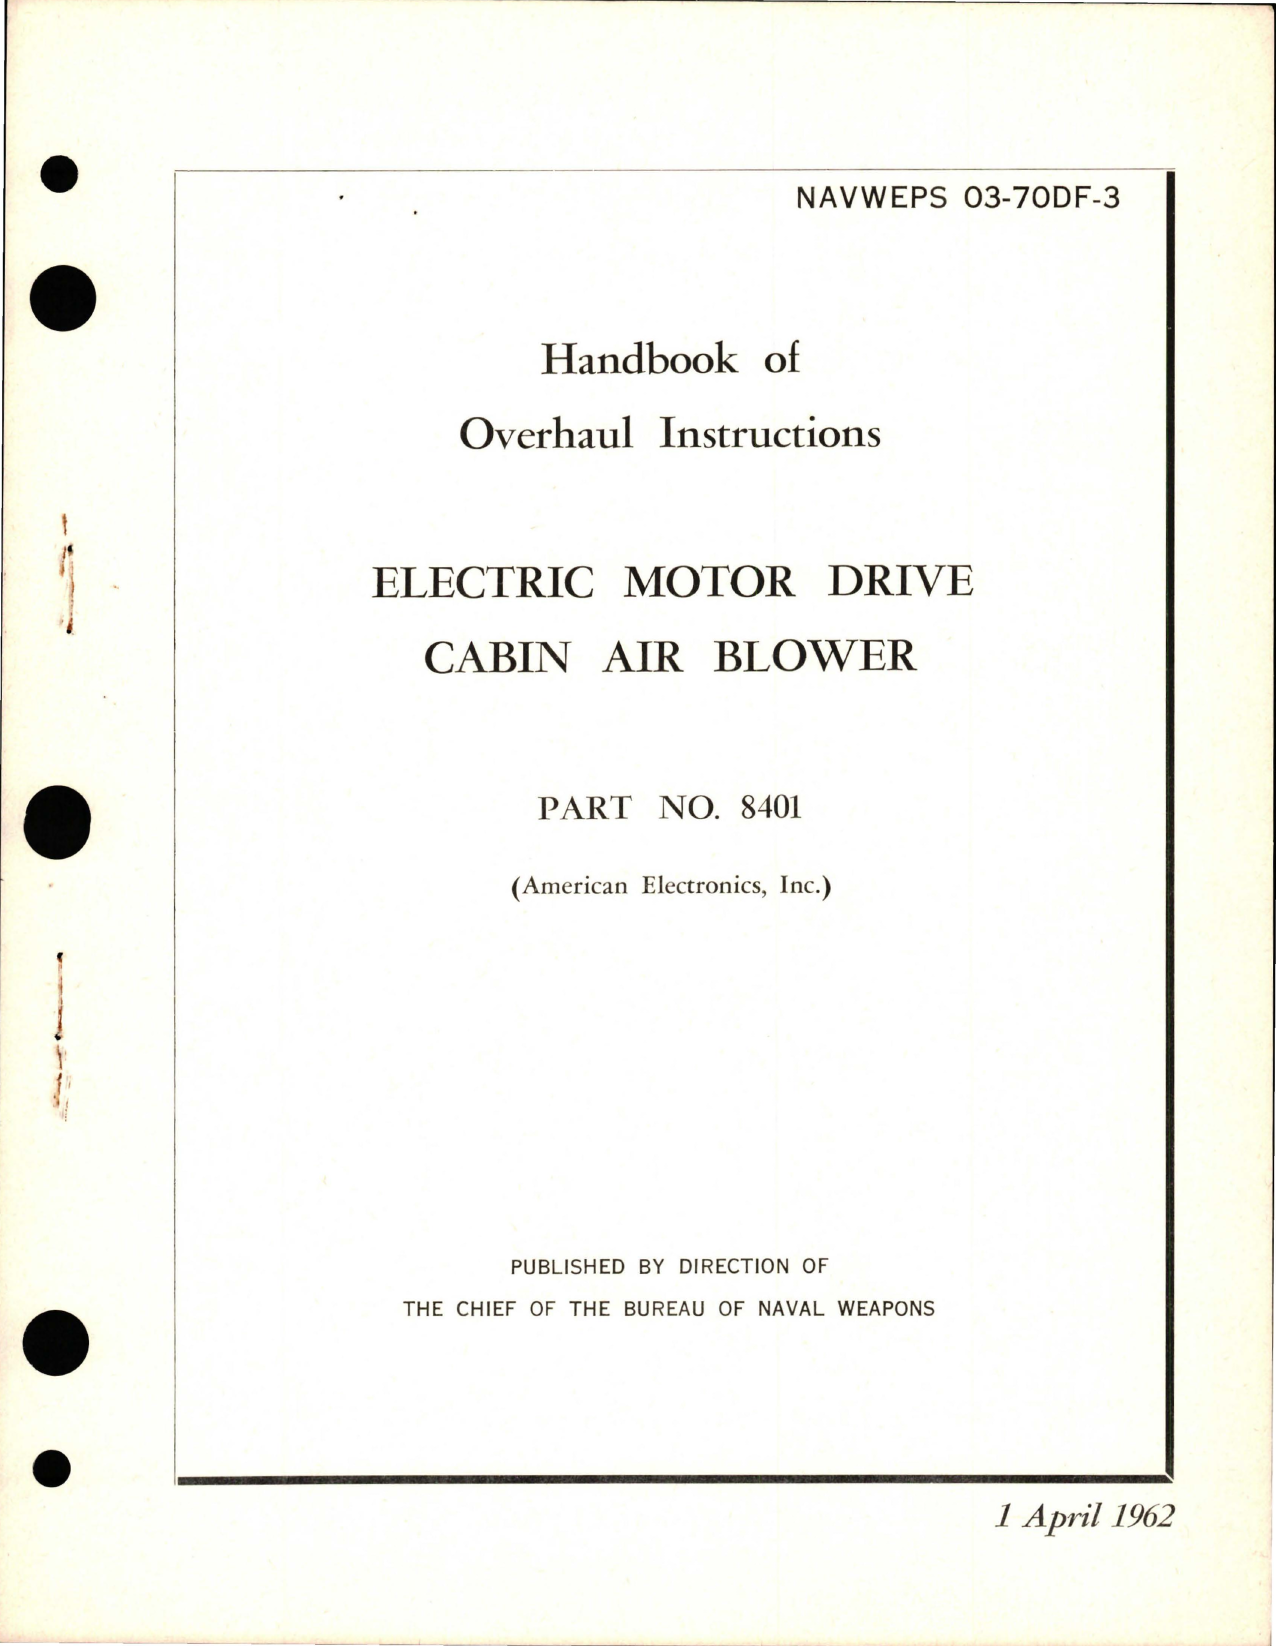 Sample page 1 from AirCorps Library document: Overhaul Instructions for Cabin Air Blower Electric Motor Drive - Part 8401 